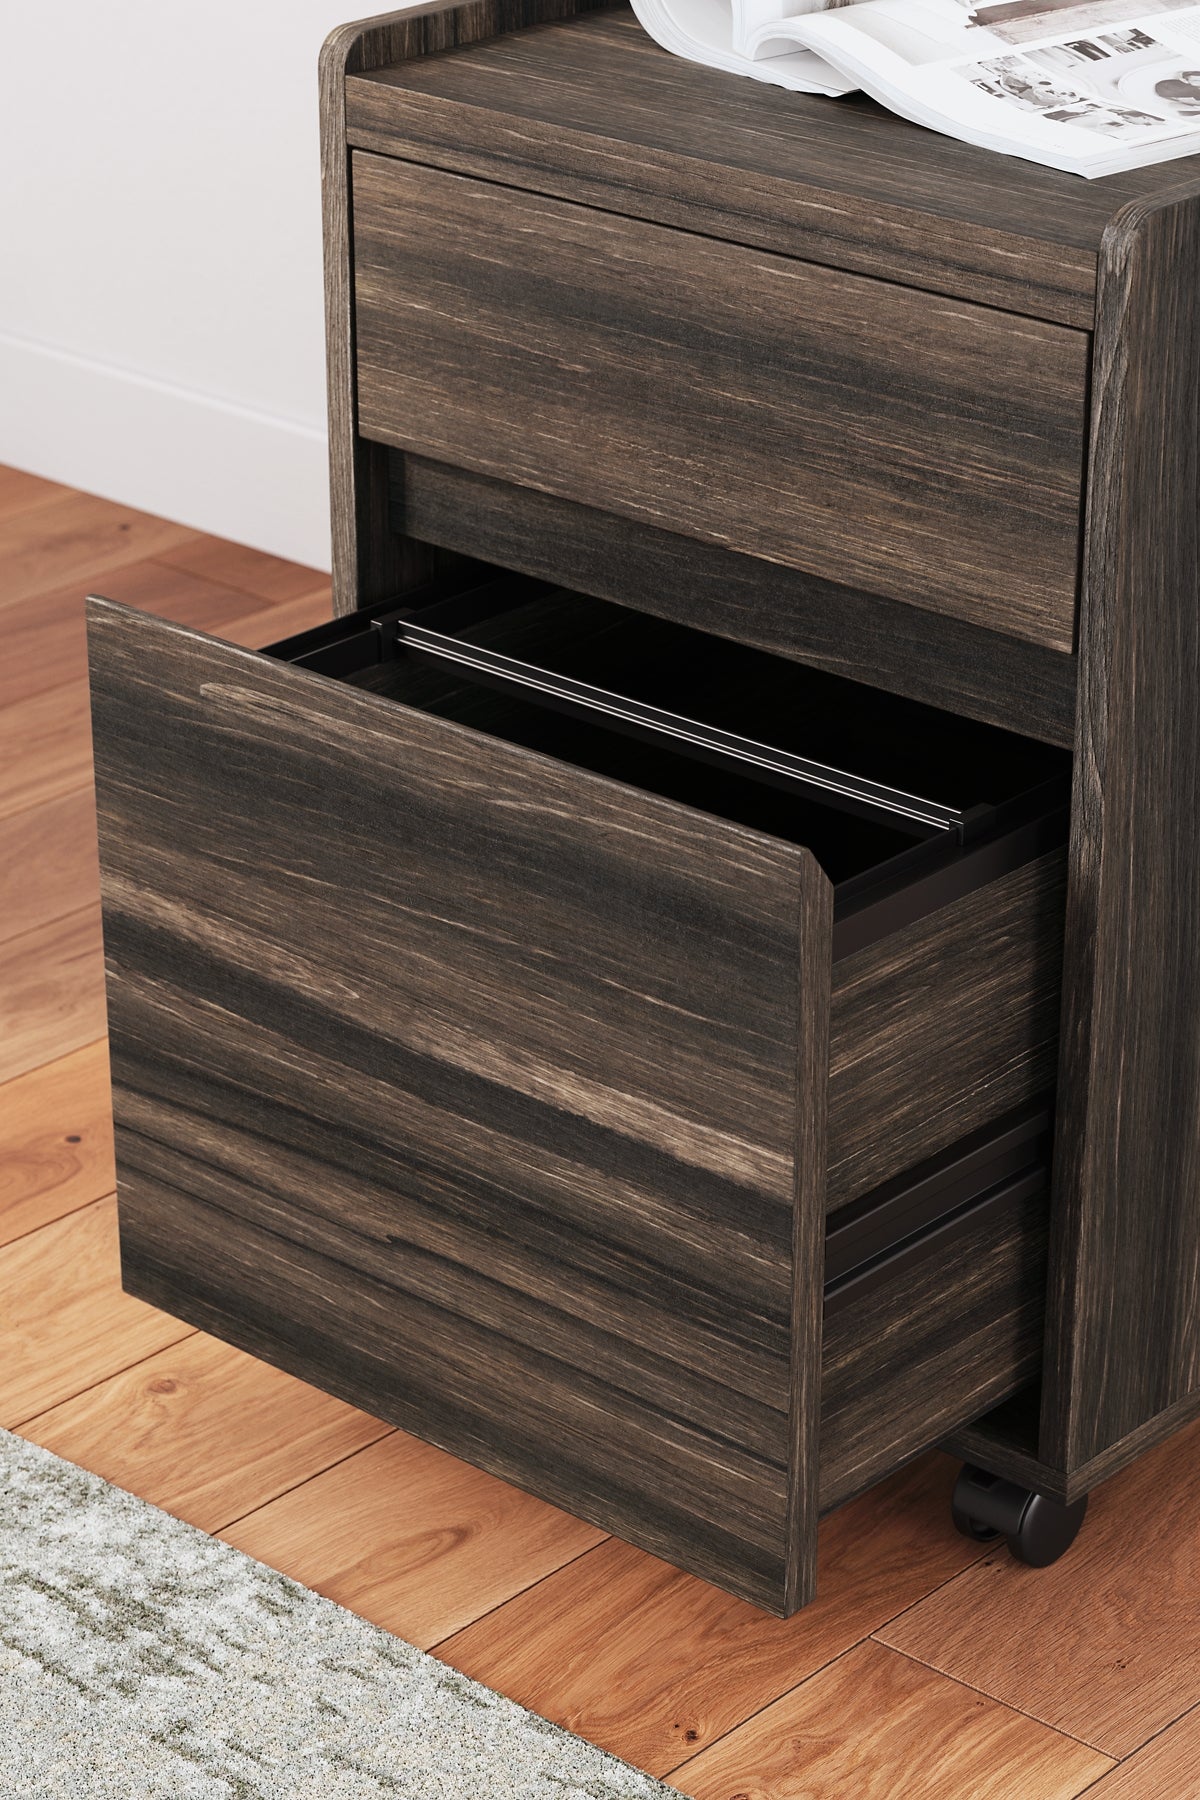 Zendex Home Office Desk and Storage JB's Furniture  Home Furniture, Home Decor, Furniture Store